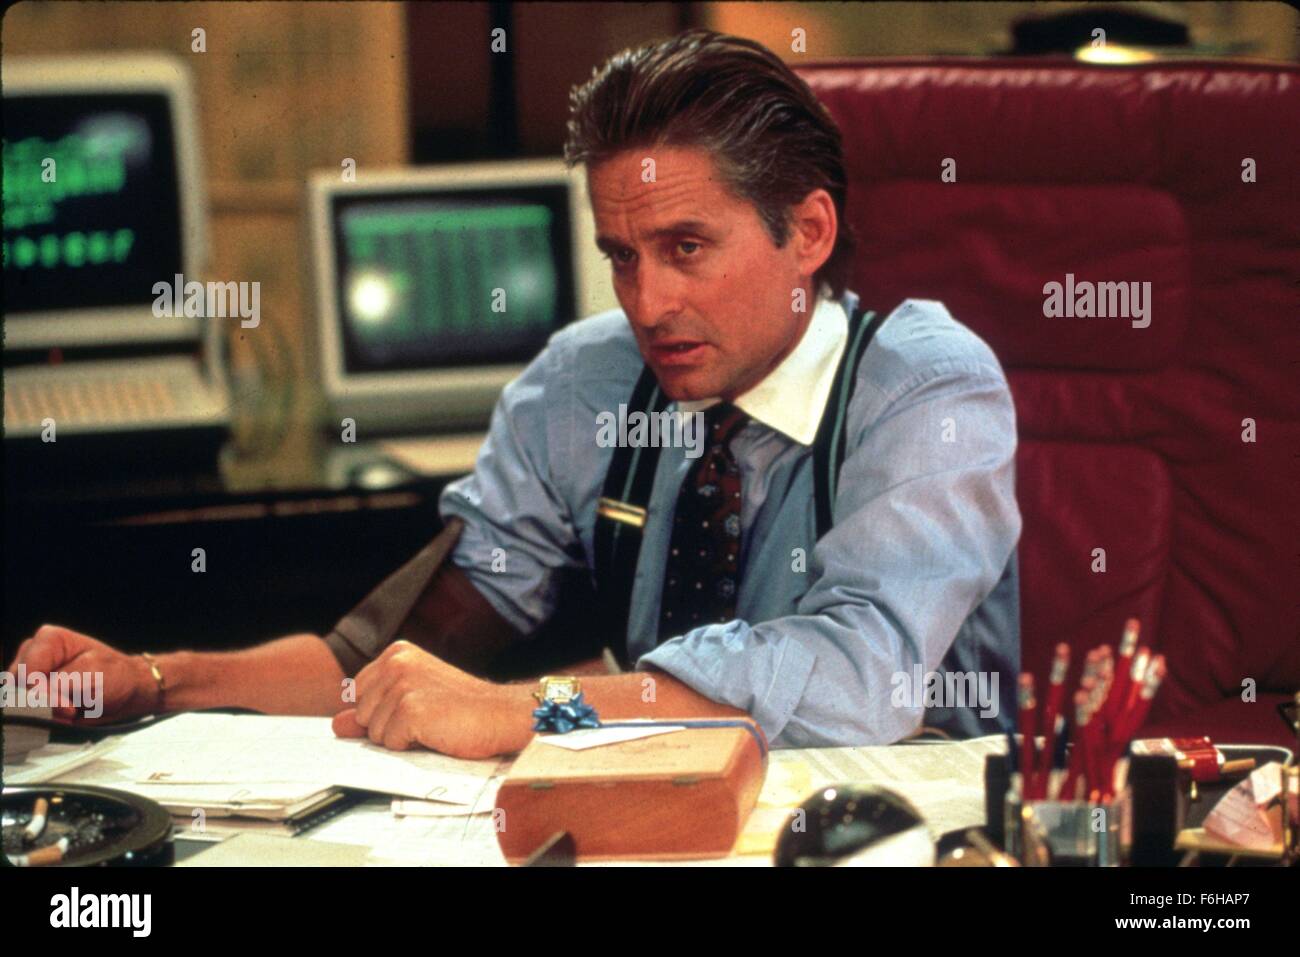 1987, Film Title: WALL STREET, Director: OLVIER STONE, Pictured: 1987, AWARDS - ACADEMY, BEST ACTOR, MICHAEL DOUGLAS, OLVIER STONE, OFFICE, DESK, COMPUTER, CORPORATE, BUSINESS, BUSINESS MAN, FINANCE, STOCKS, OSCAR RETRO, OSCAR (MOVIE), HARD WORKING, TIRED. (Credit Image: SNAP) (Credit Image: c SNAP/Entertainment Pictures) Stock Photo